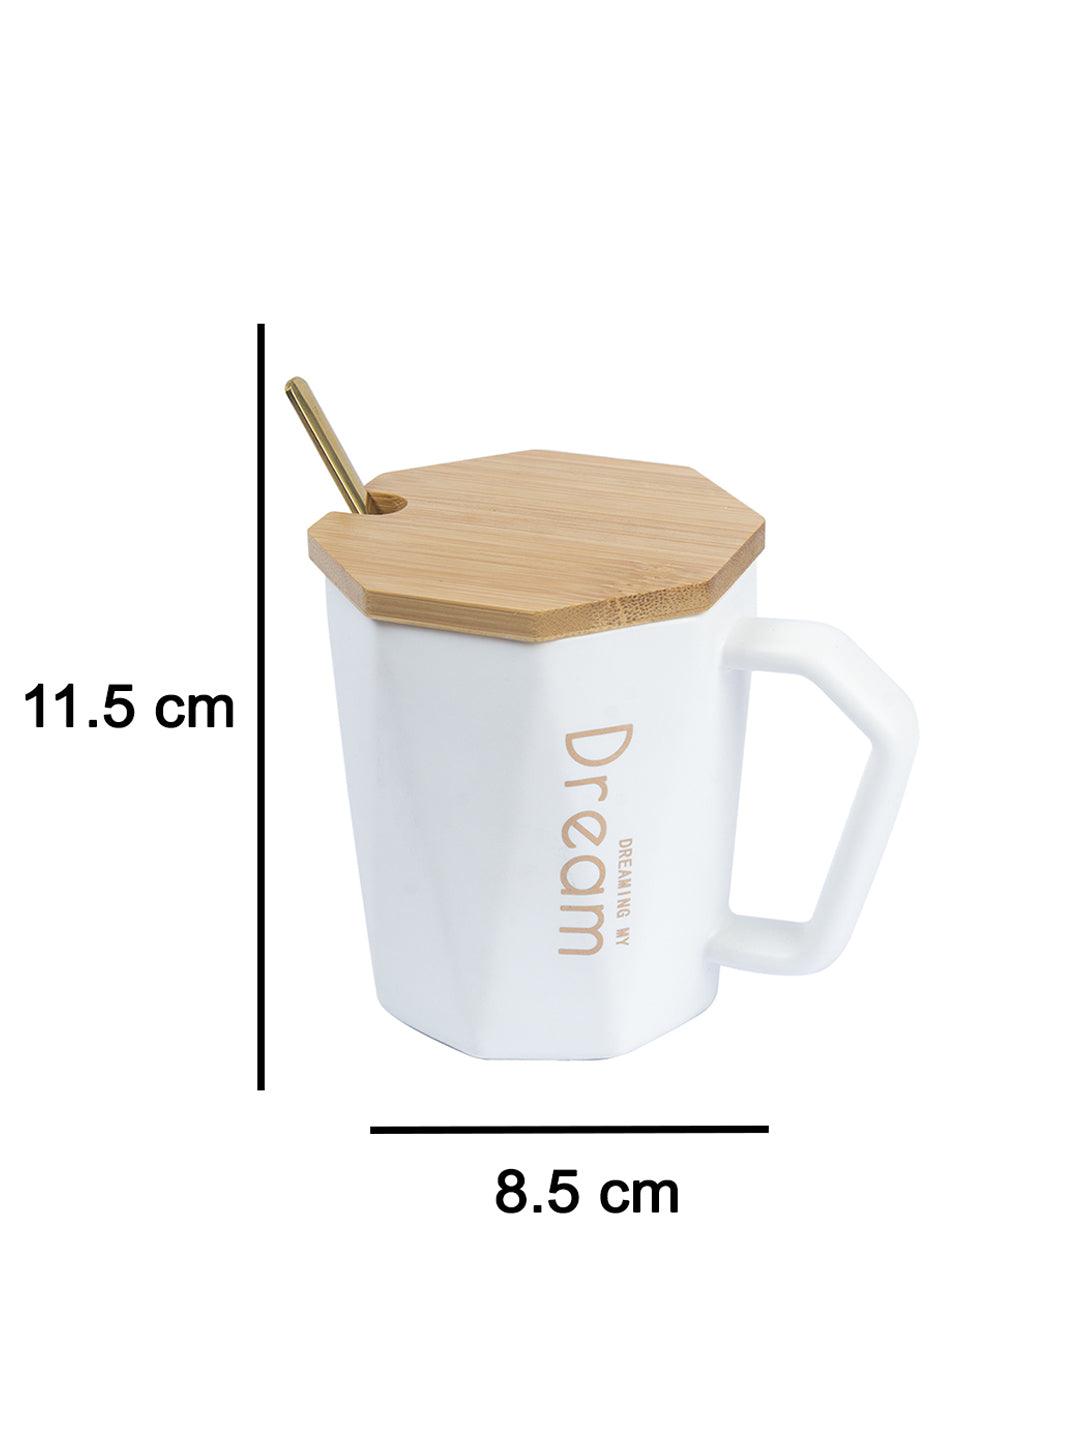 DREAMING MY Dream' Coffee Mug With Wooden Lid - White, 320 Ml - MARKET 99